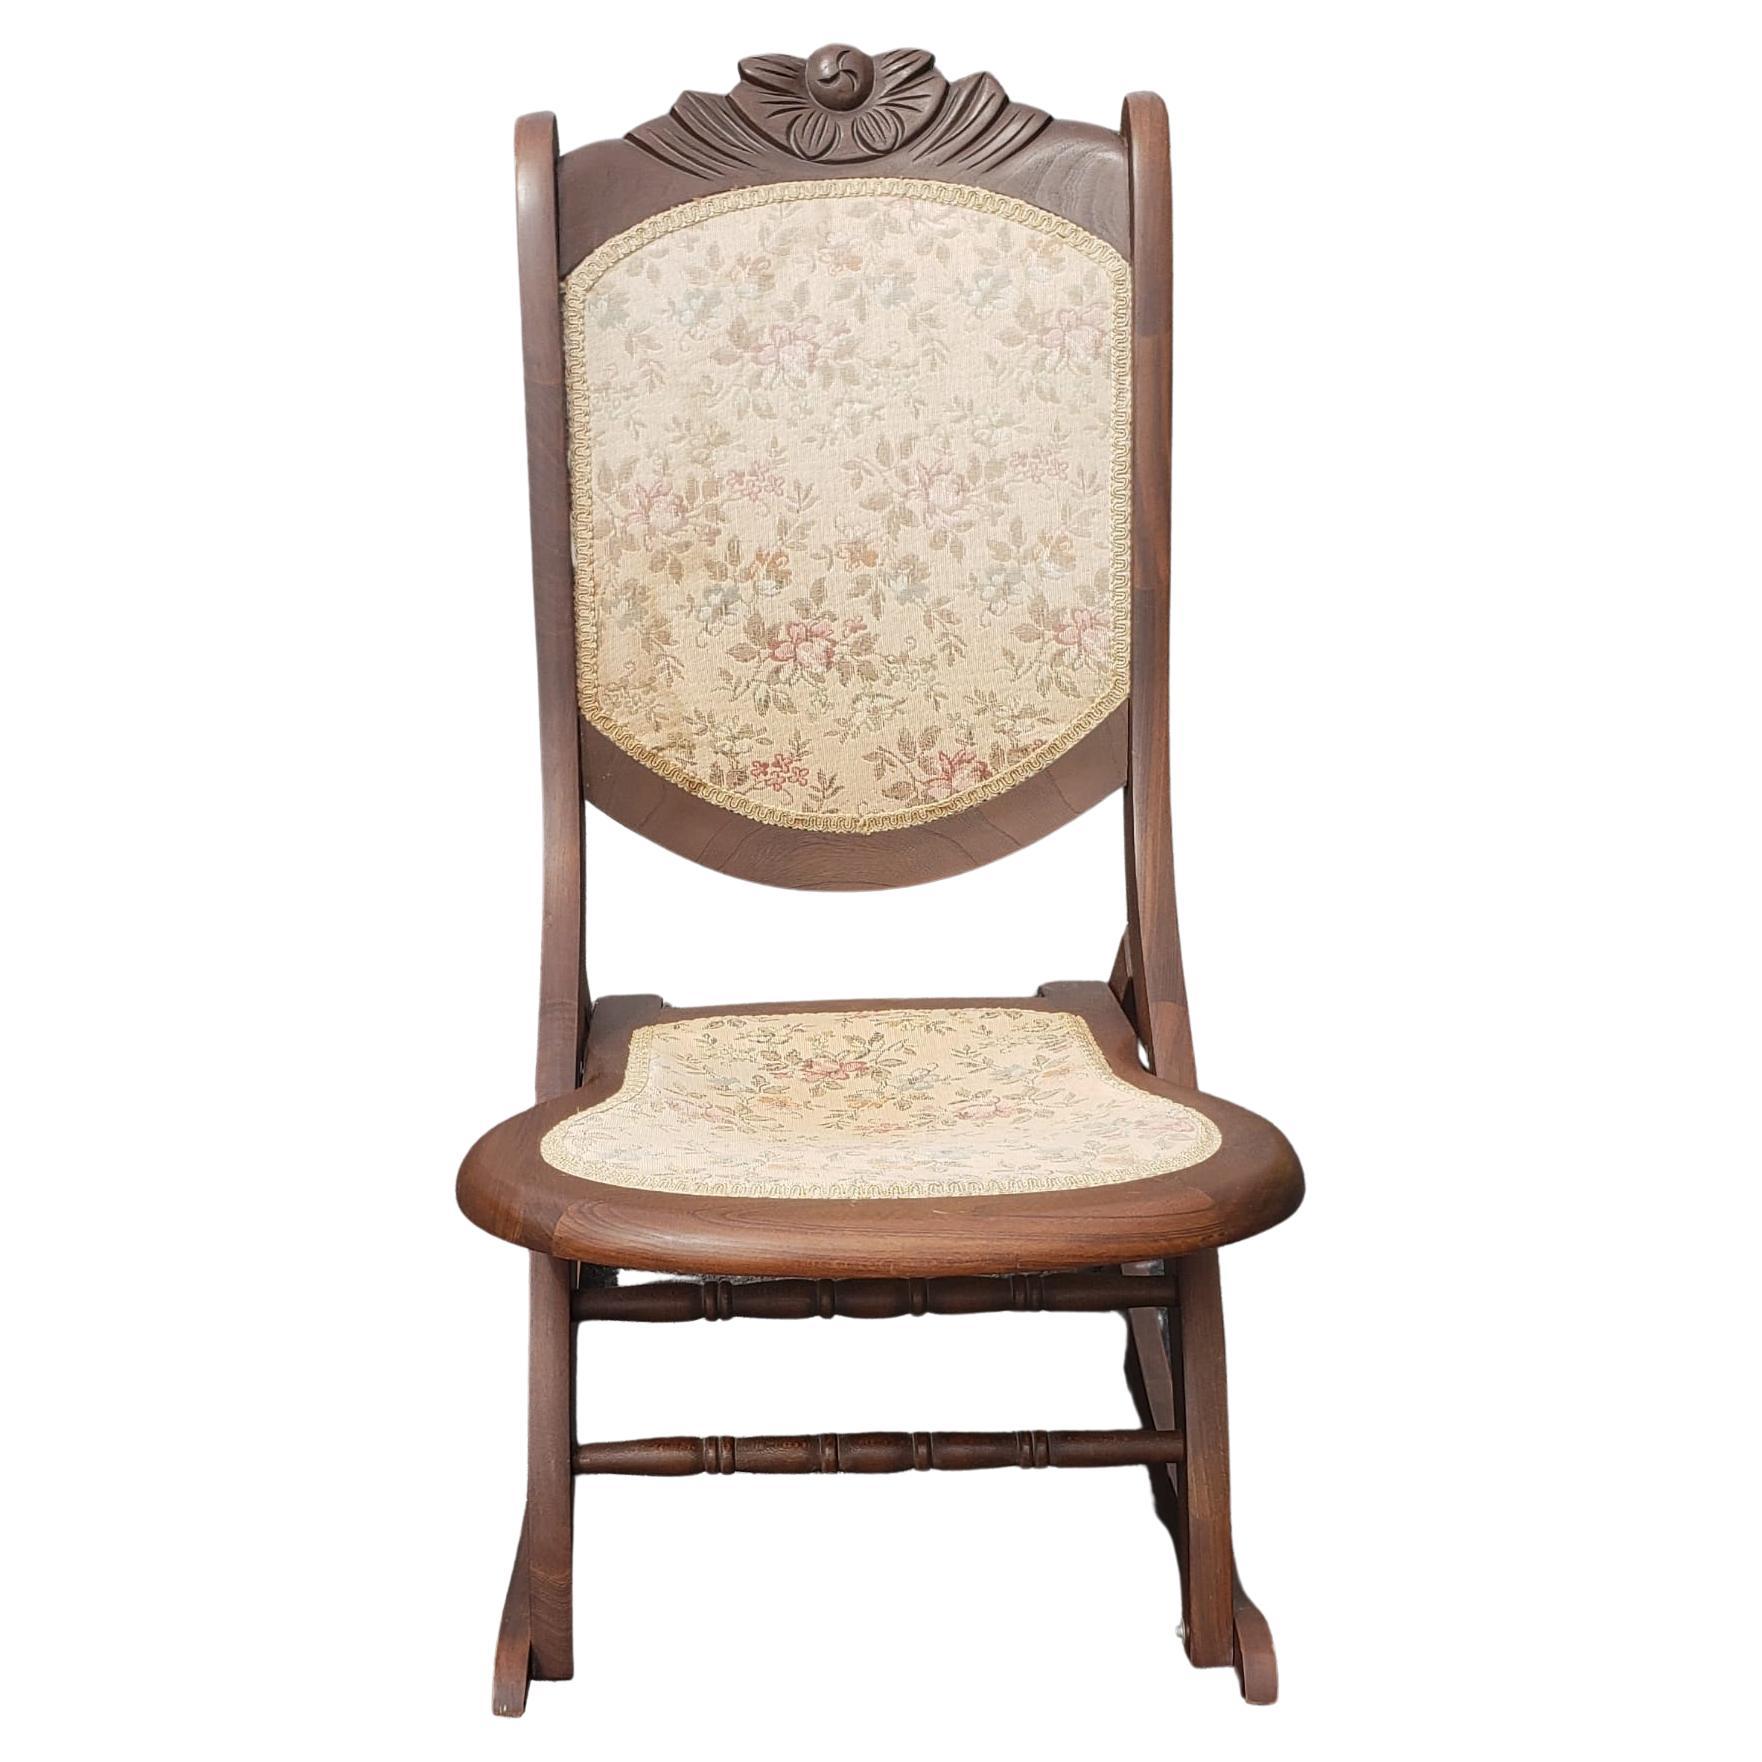 Early 20th Century Carved Walnut and Upholstered Folding Rocking Chair For Sale